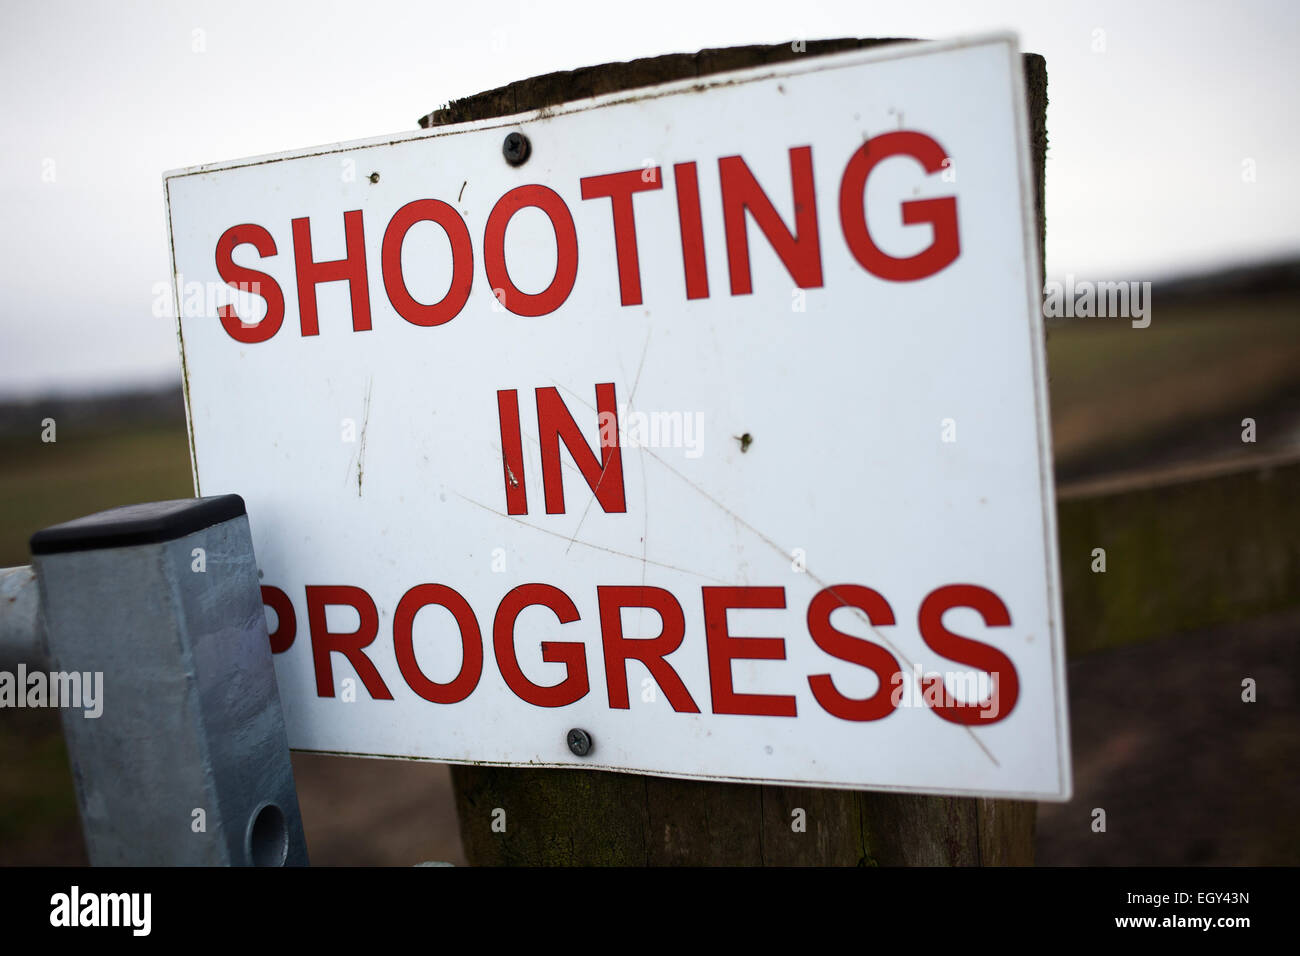 A shooting in progress sign. Stock Photo